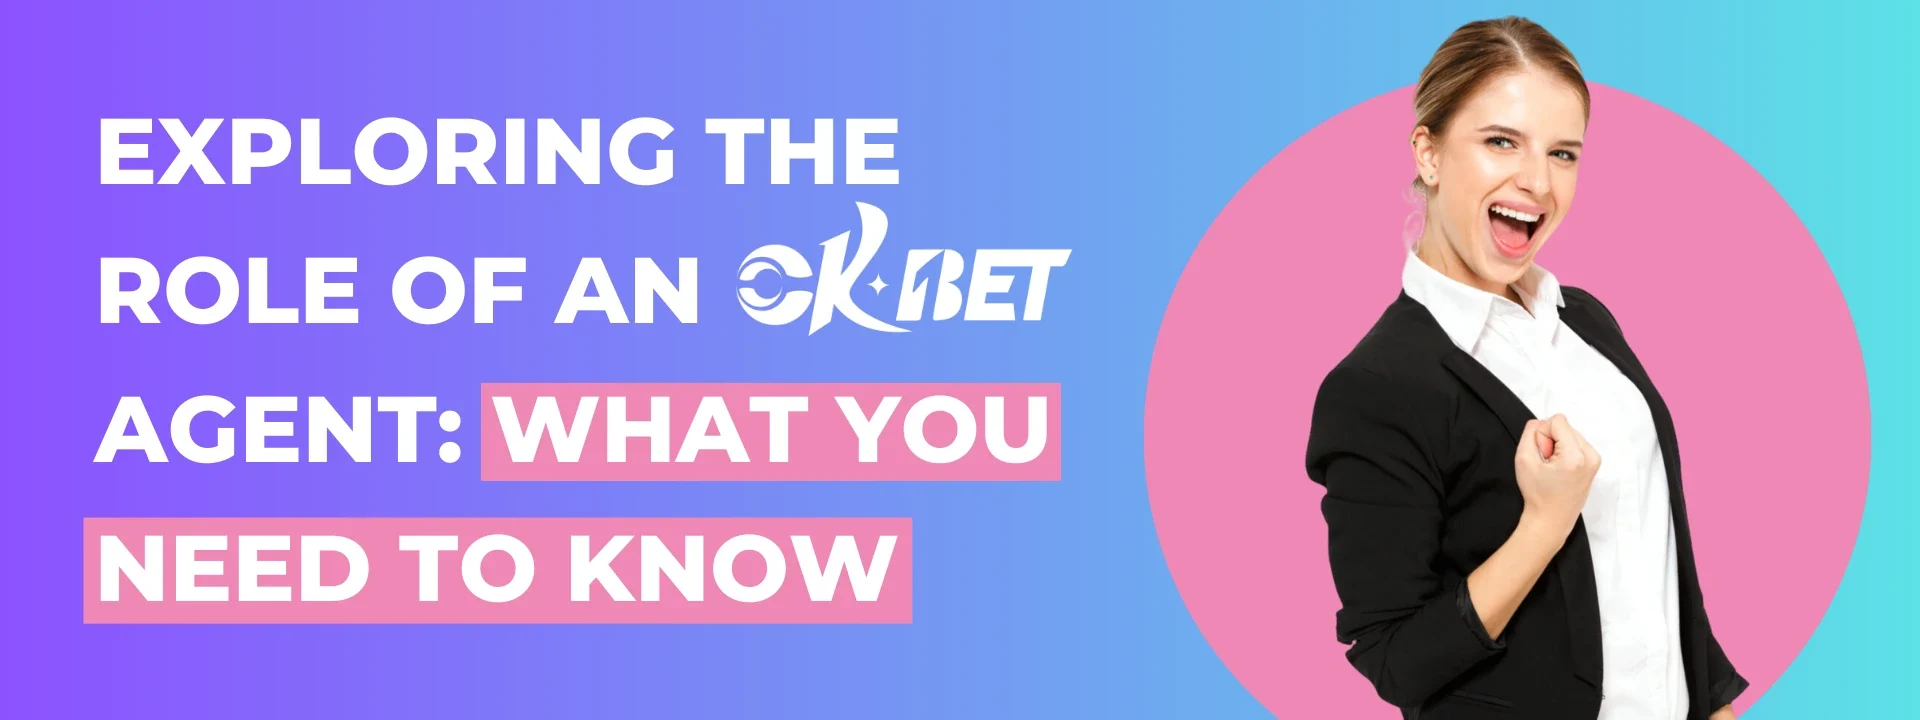 Exploring the Role of an OKBET Agents: What You Need to Know